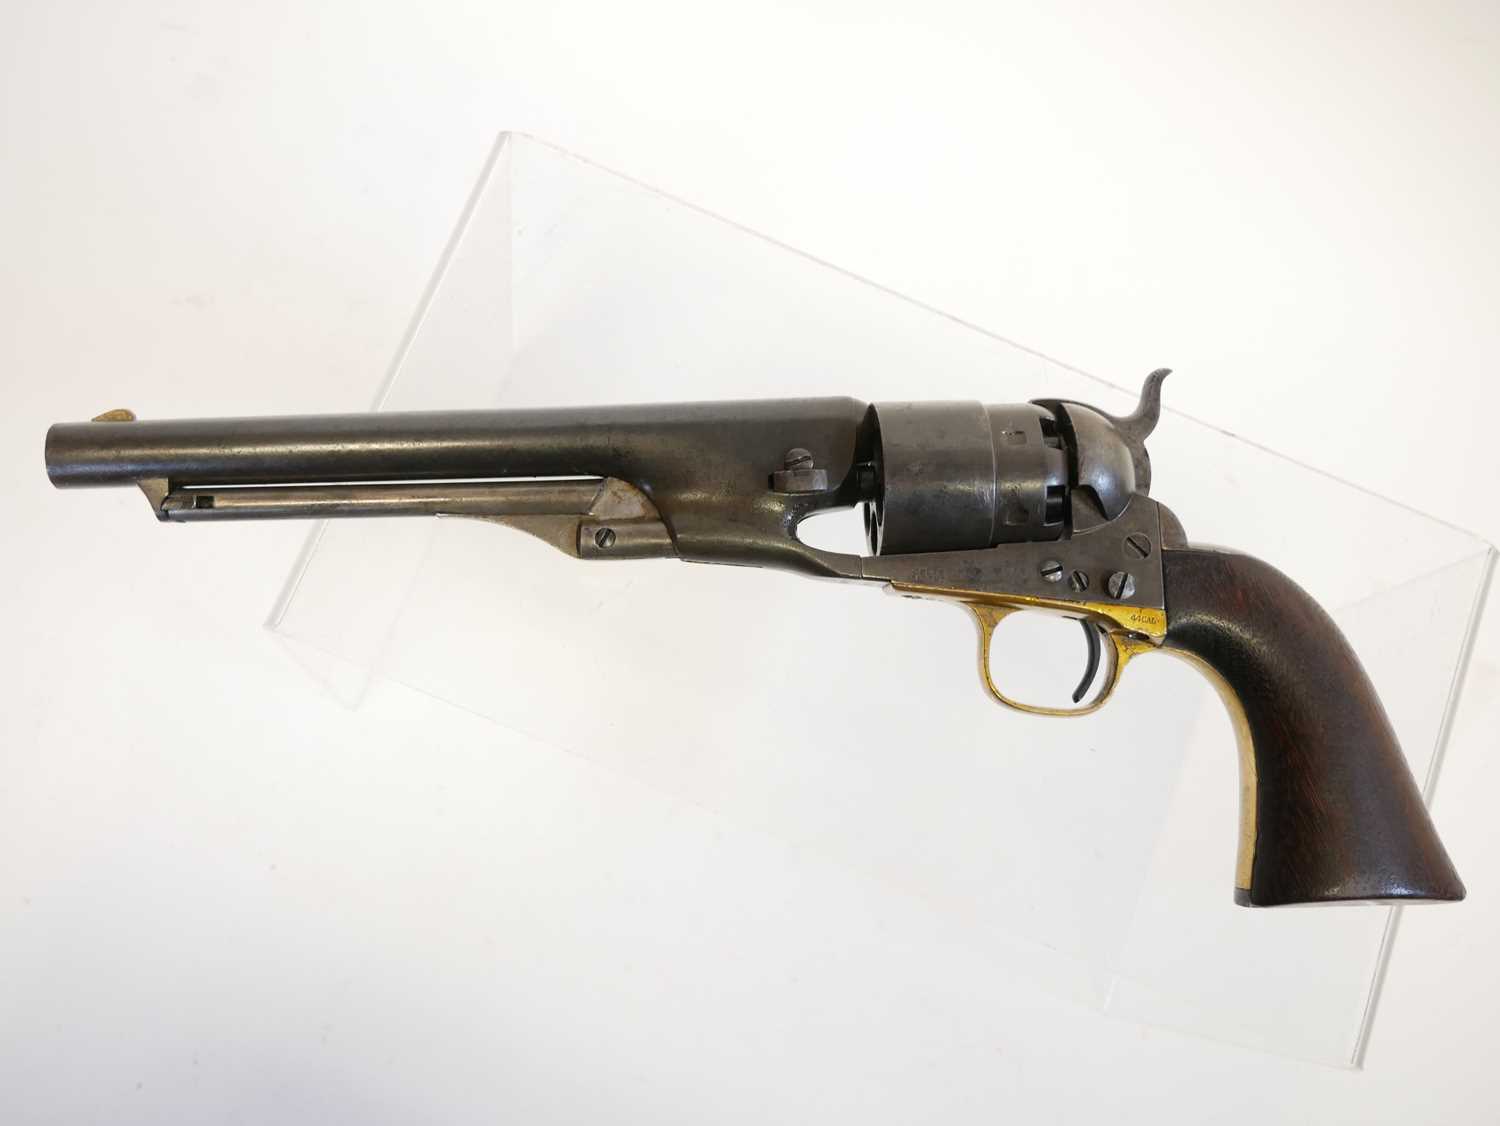 Colt Army .44 percussion revolver, serial number 16442 matching throughout, 8 inch round barrel with - Image 6 of 11